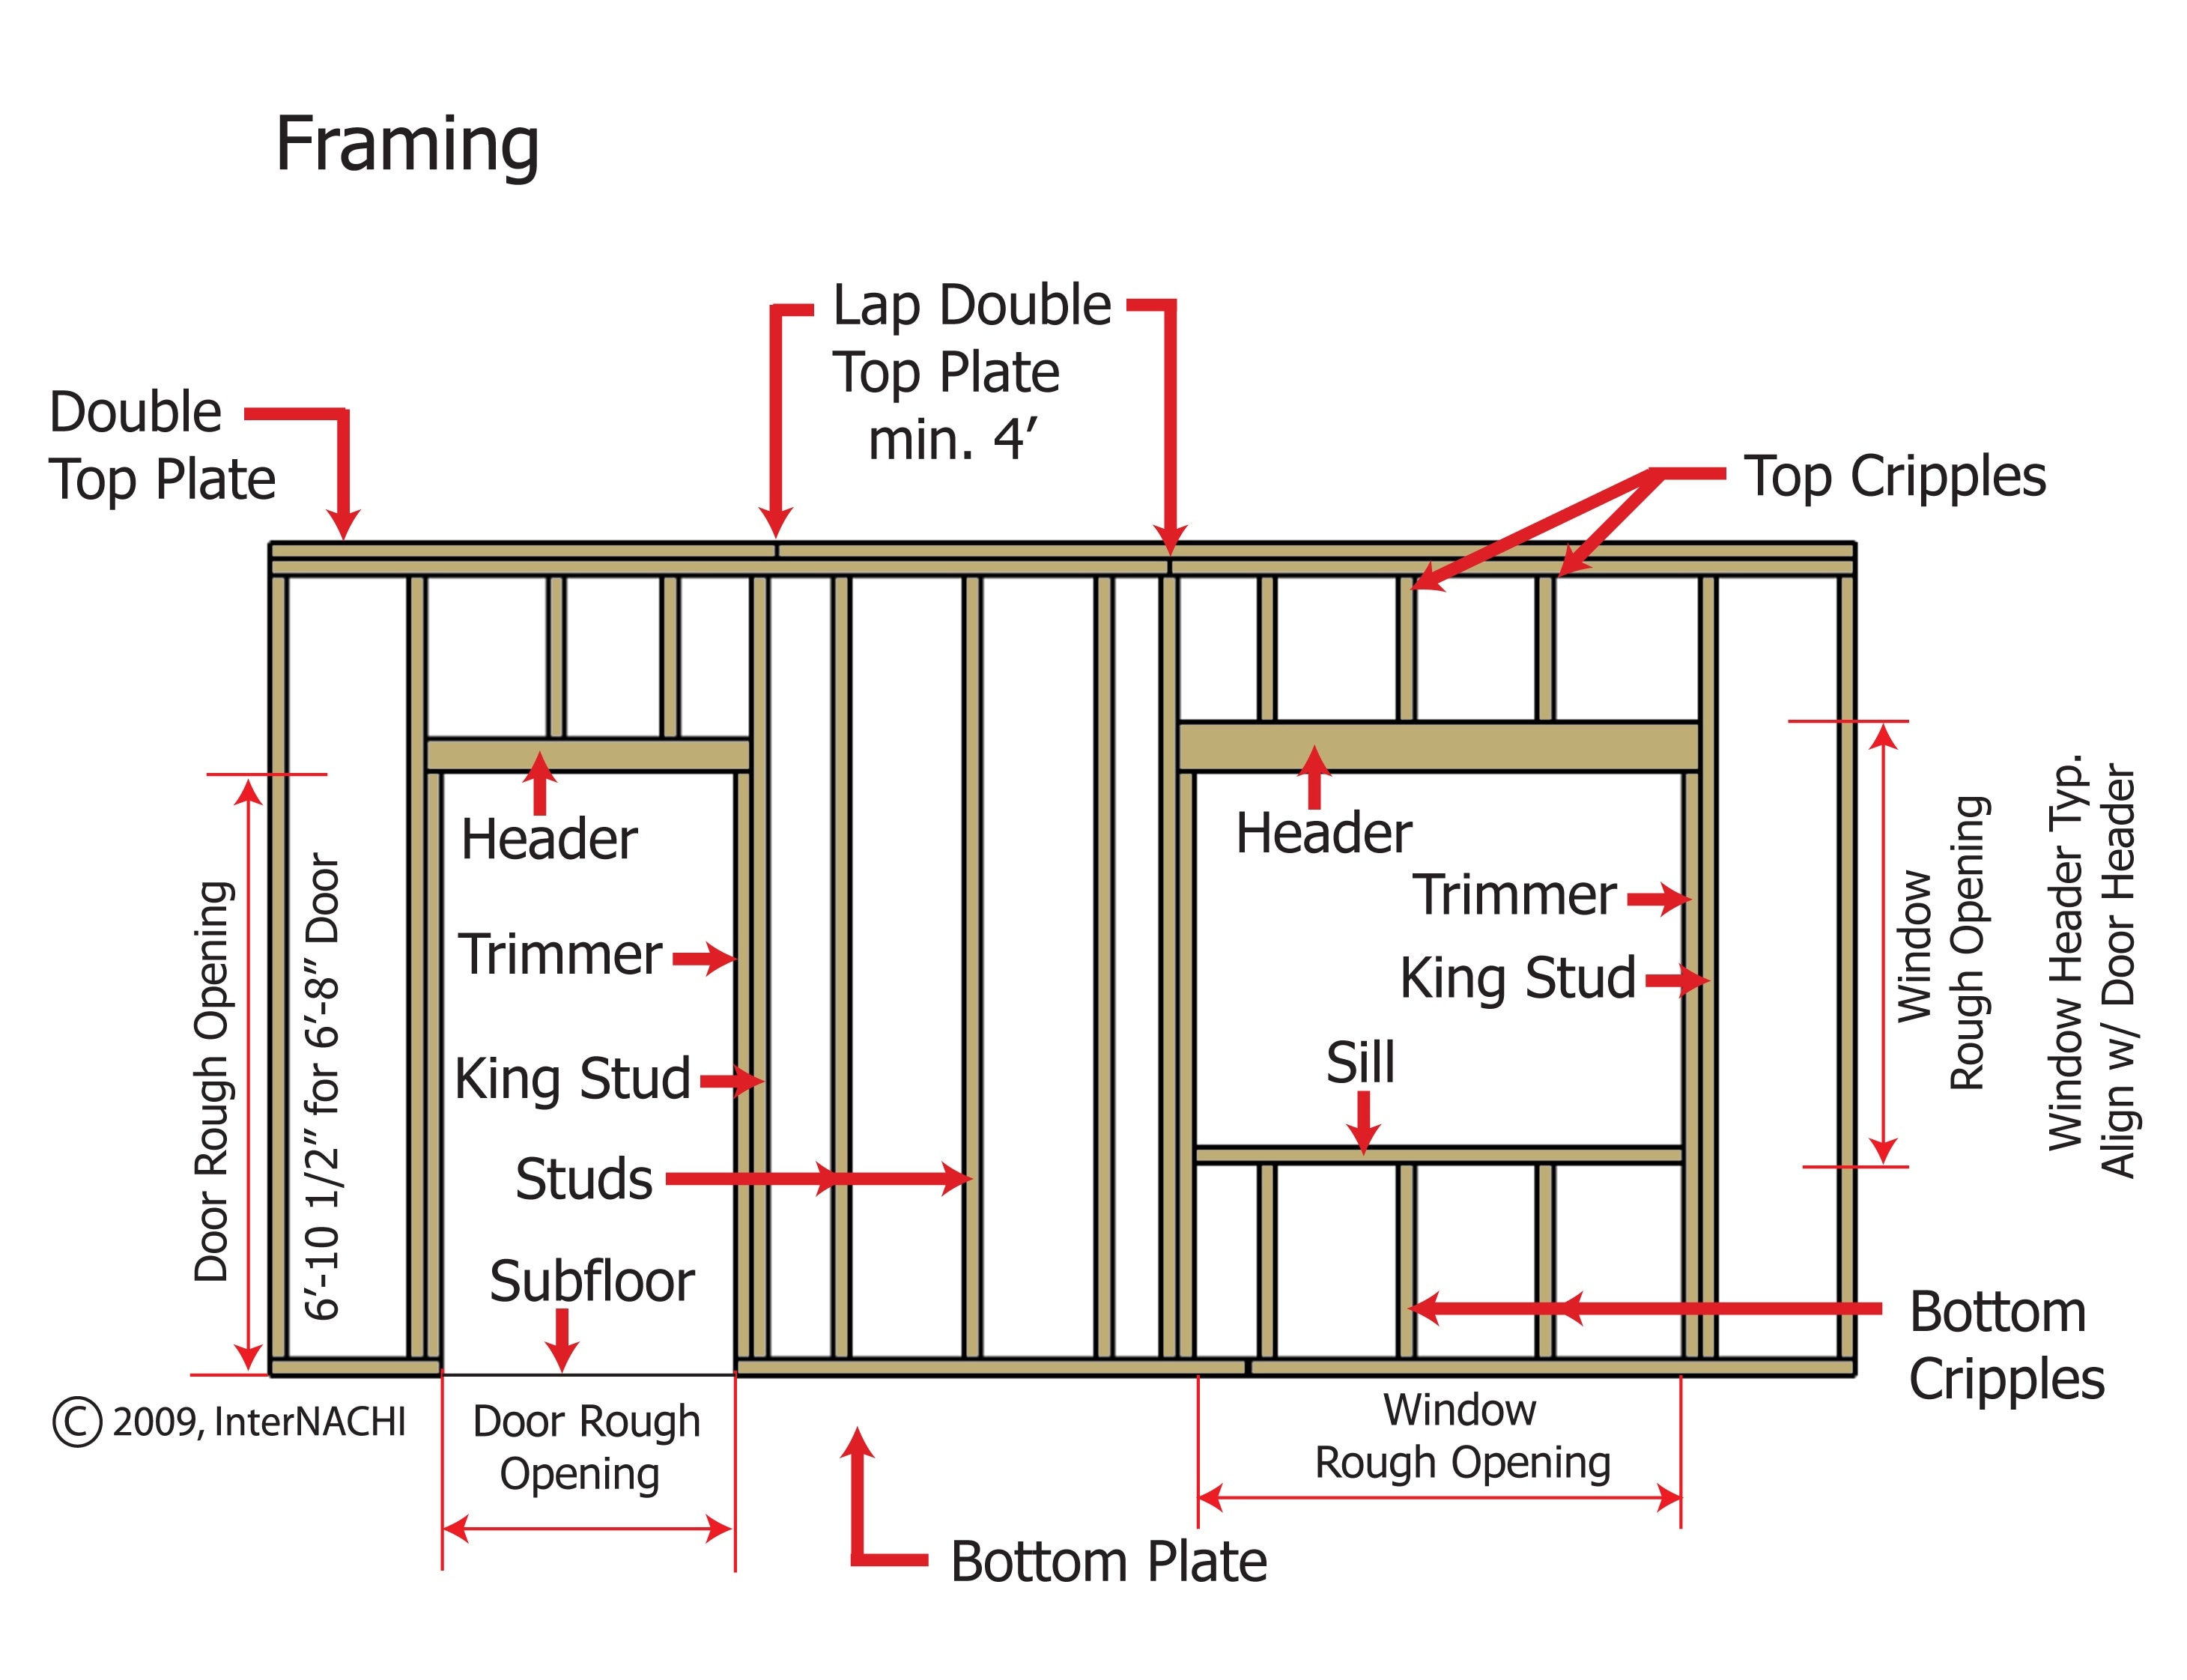 Exterior walls of wood-frame construction must be designed and constructed according to building code. Components include bottom and top plates, studs, king studs, jack studs, trimmer studs, cripple studs, sills, headers, and door and window openings.